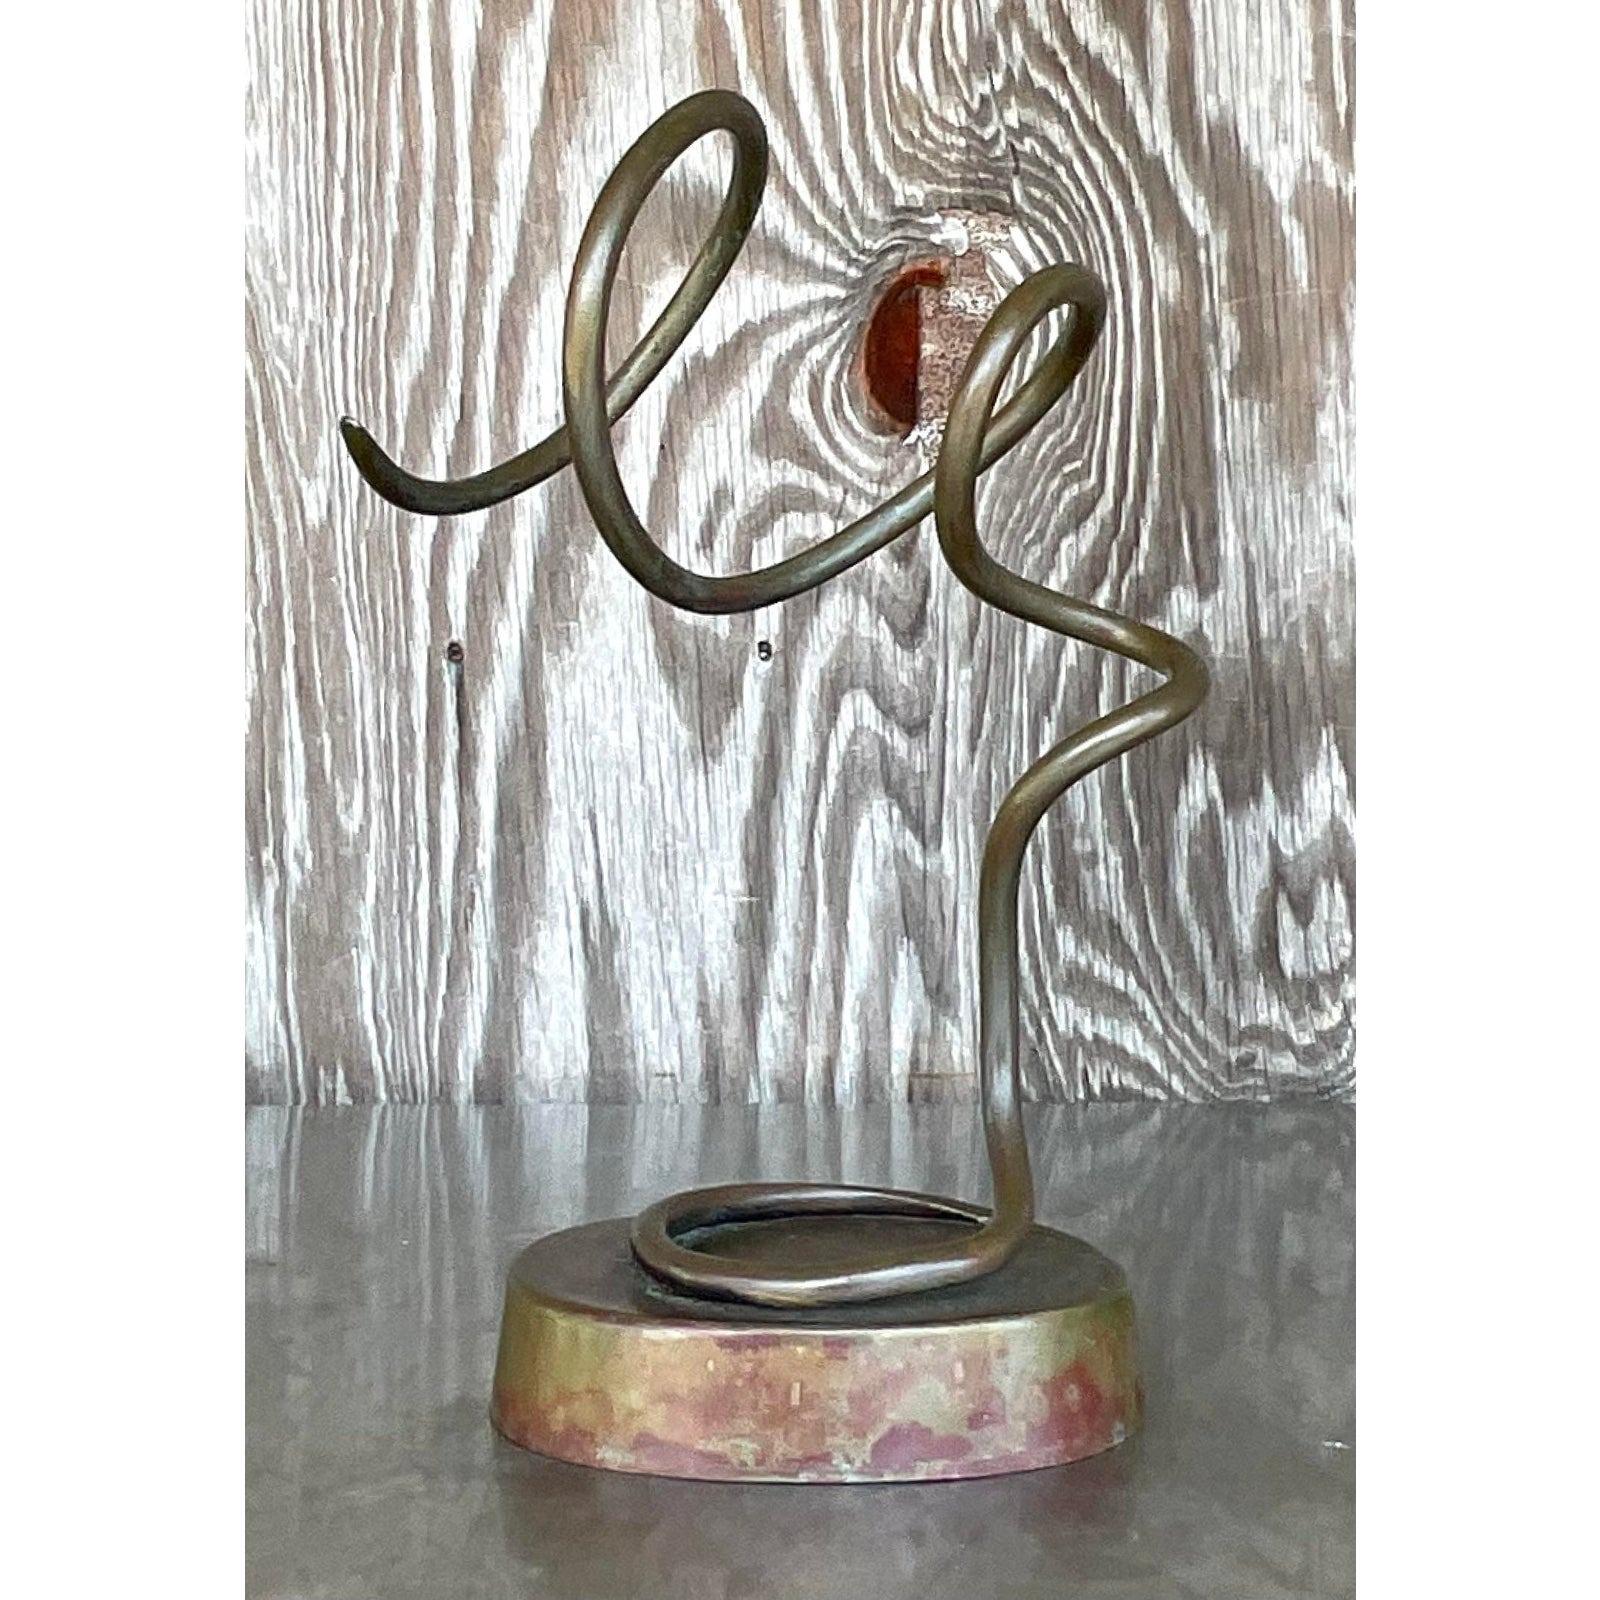 A fabulous vintage Boho metal sculpture. A chic patinated finish on a swirl design. Acquired from a Palm Beach estate.

The sculpture is in great vintage condition. Minor scuffs and blemishes appropriate to its age and use. All over patinated finish